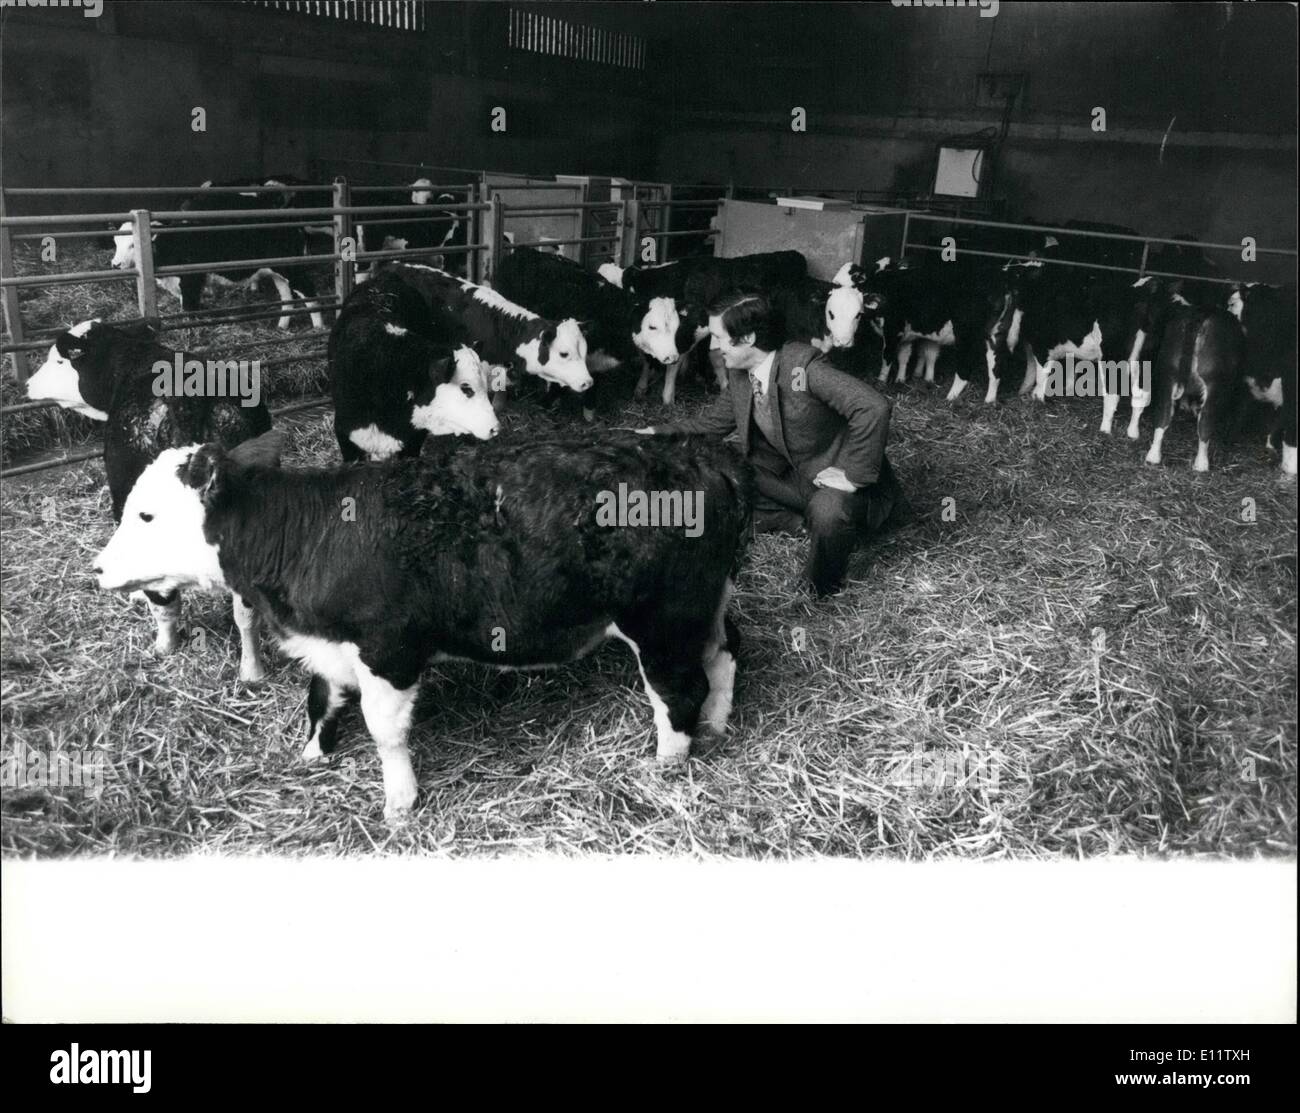 Apr. 04, 1980 - Revolutionary Welfare Veal System: Animal lovers can happily eat veal in future. The UK veal industry has been revolutionized by a new welfare production system developed by Quantook Veal, the largest veal producers in the country and part of the Voles group. Quantook with their associated company, Bellinger Brothere, specialists veal wholesalers, provide 90% of the retail veal in the UK. ''Gone are the traditional cramped veal crates and with them the reason for consumer resistance to veal buying' said Mr Stock Photo